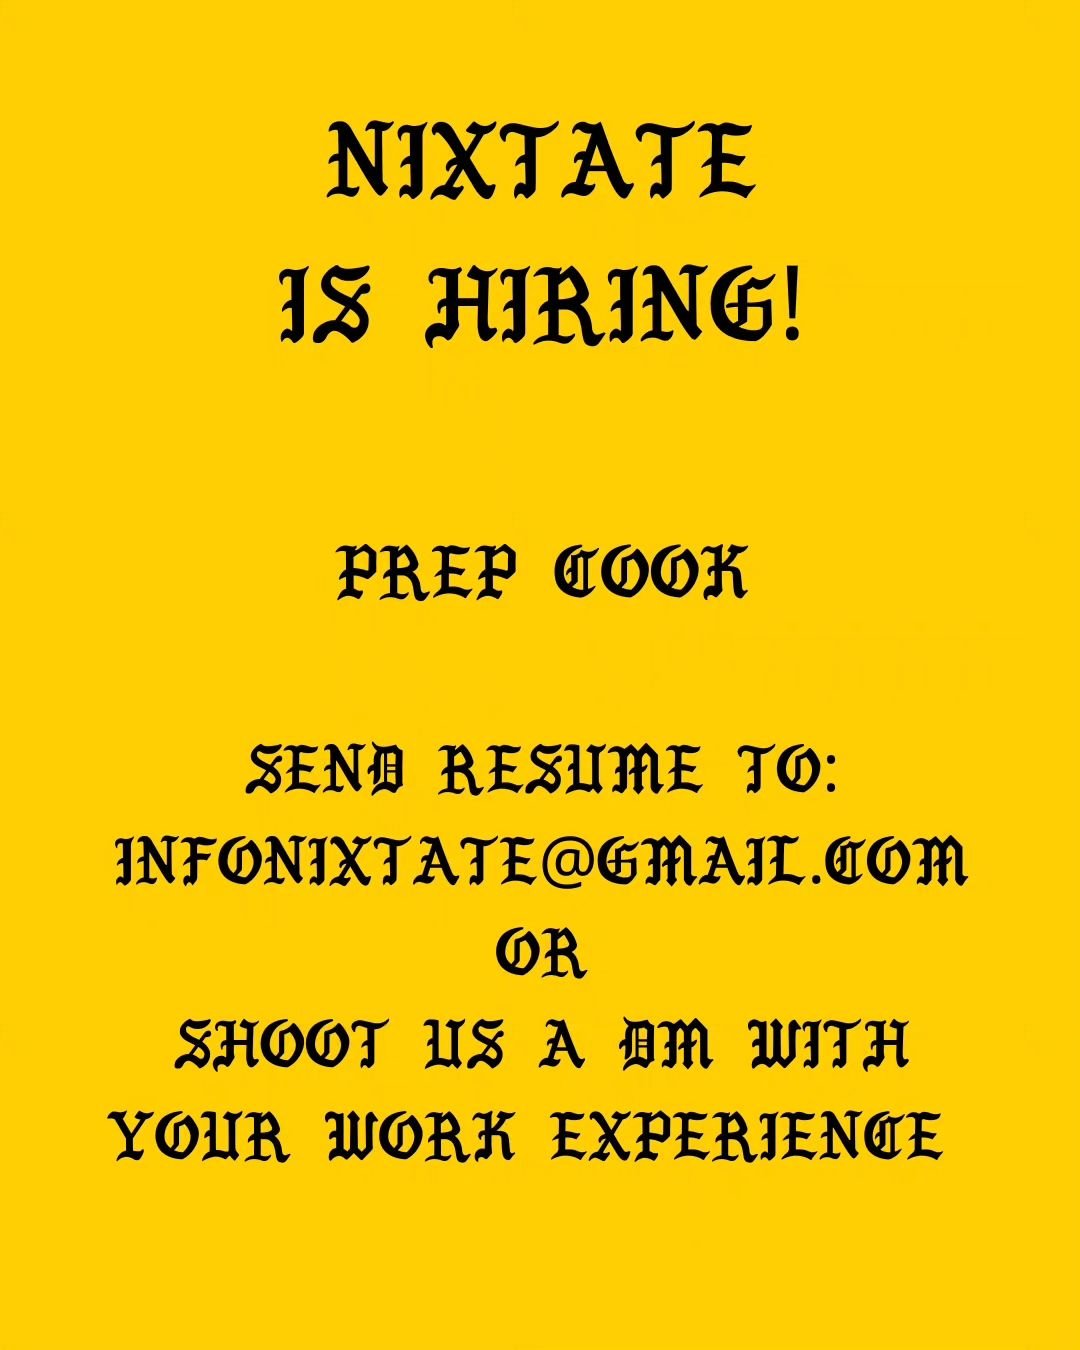 We're looking for a prepcook to help us take this to the next level!
Email your information to infonixtate@gmail.com if you want us to respond quickly, DMs for a slow roll.